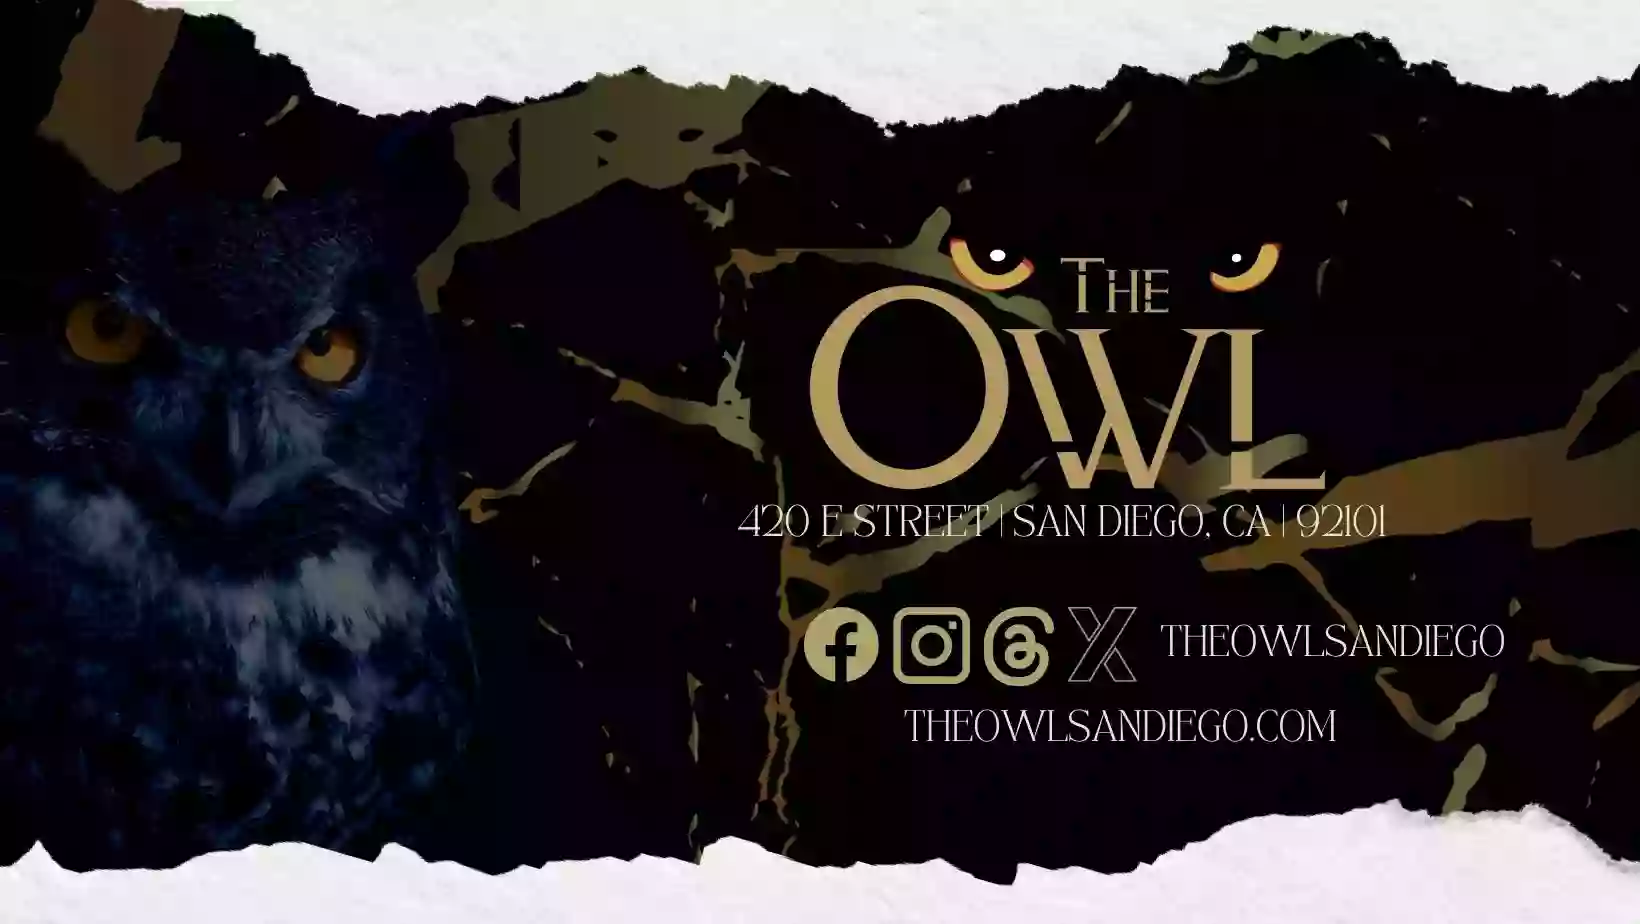 The Owl Lounge